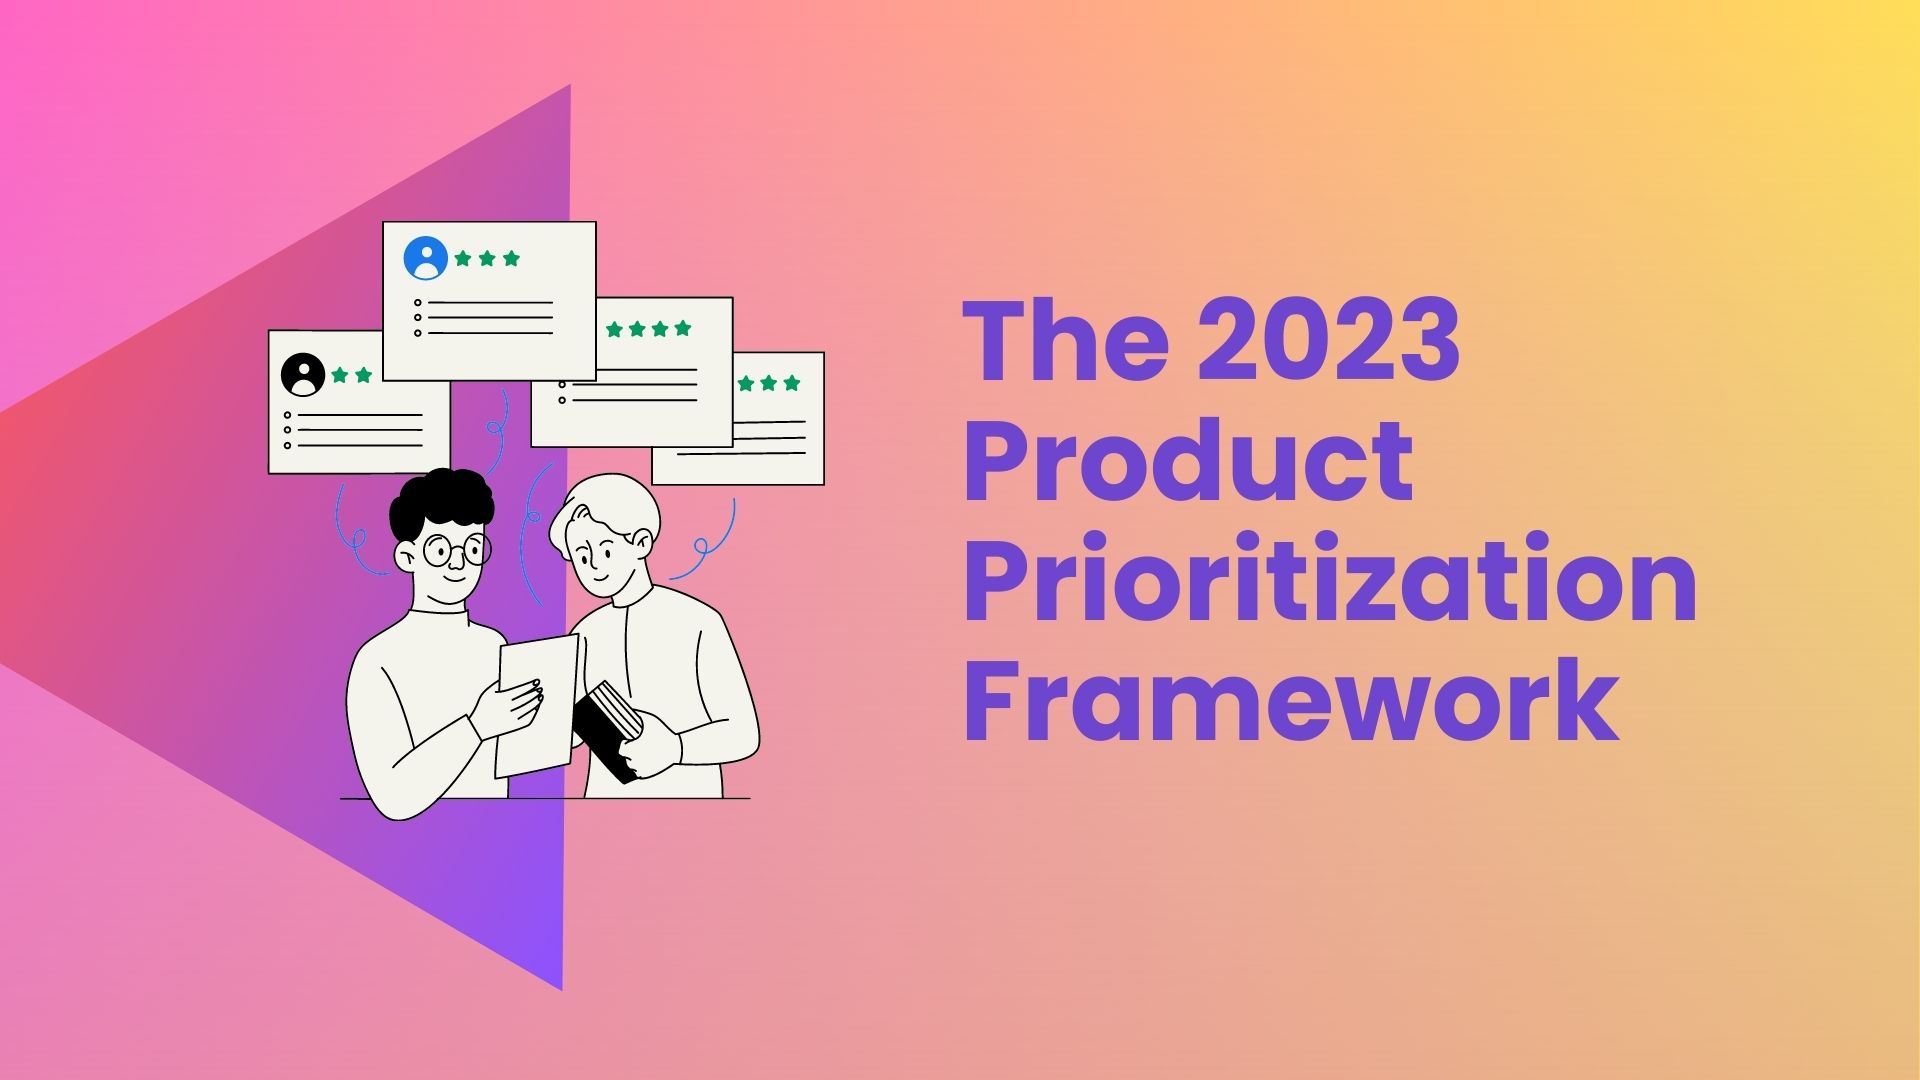 The 2023 Product Prioritization Framework